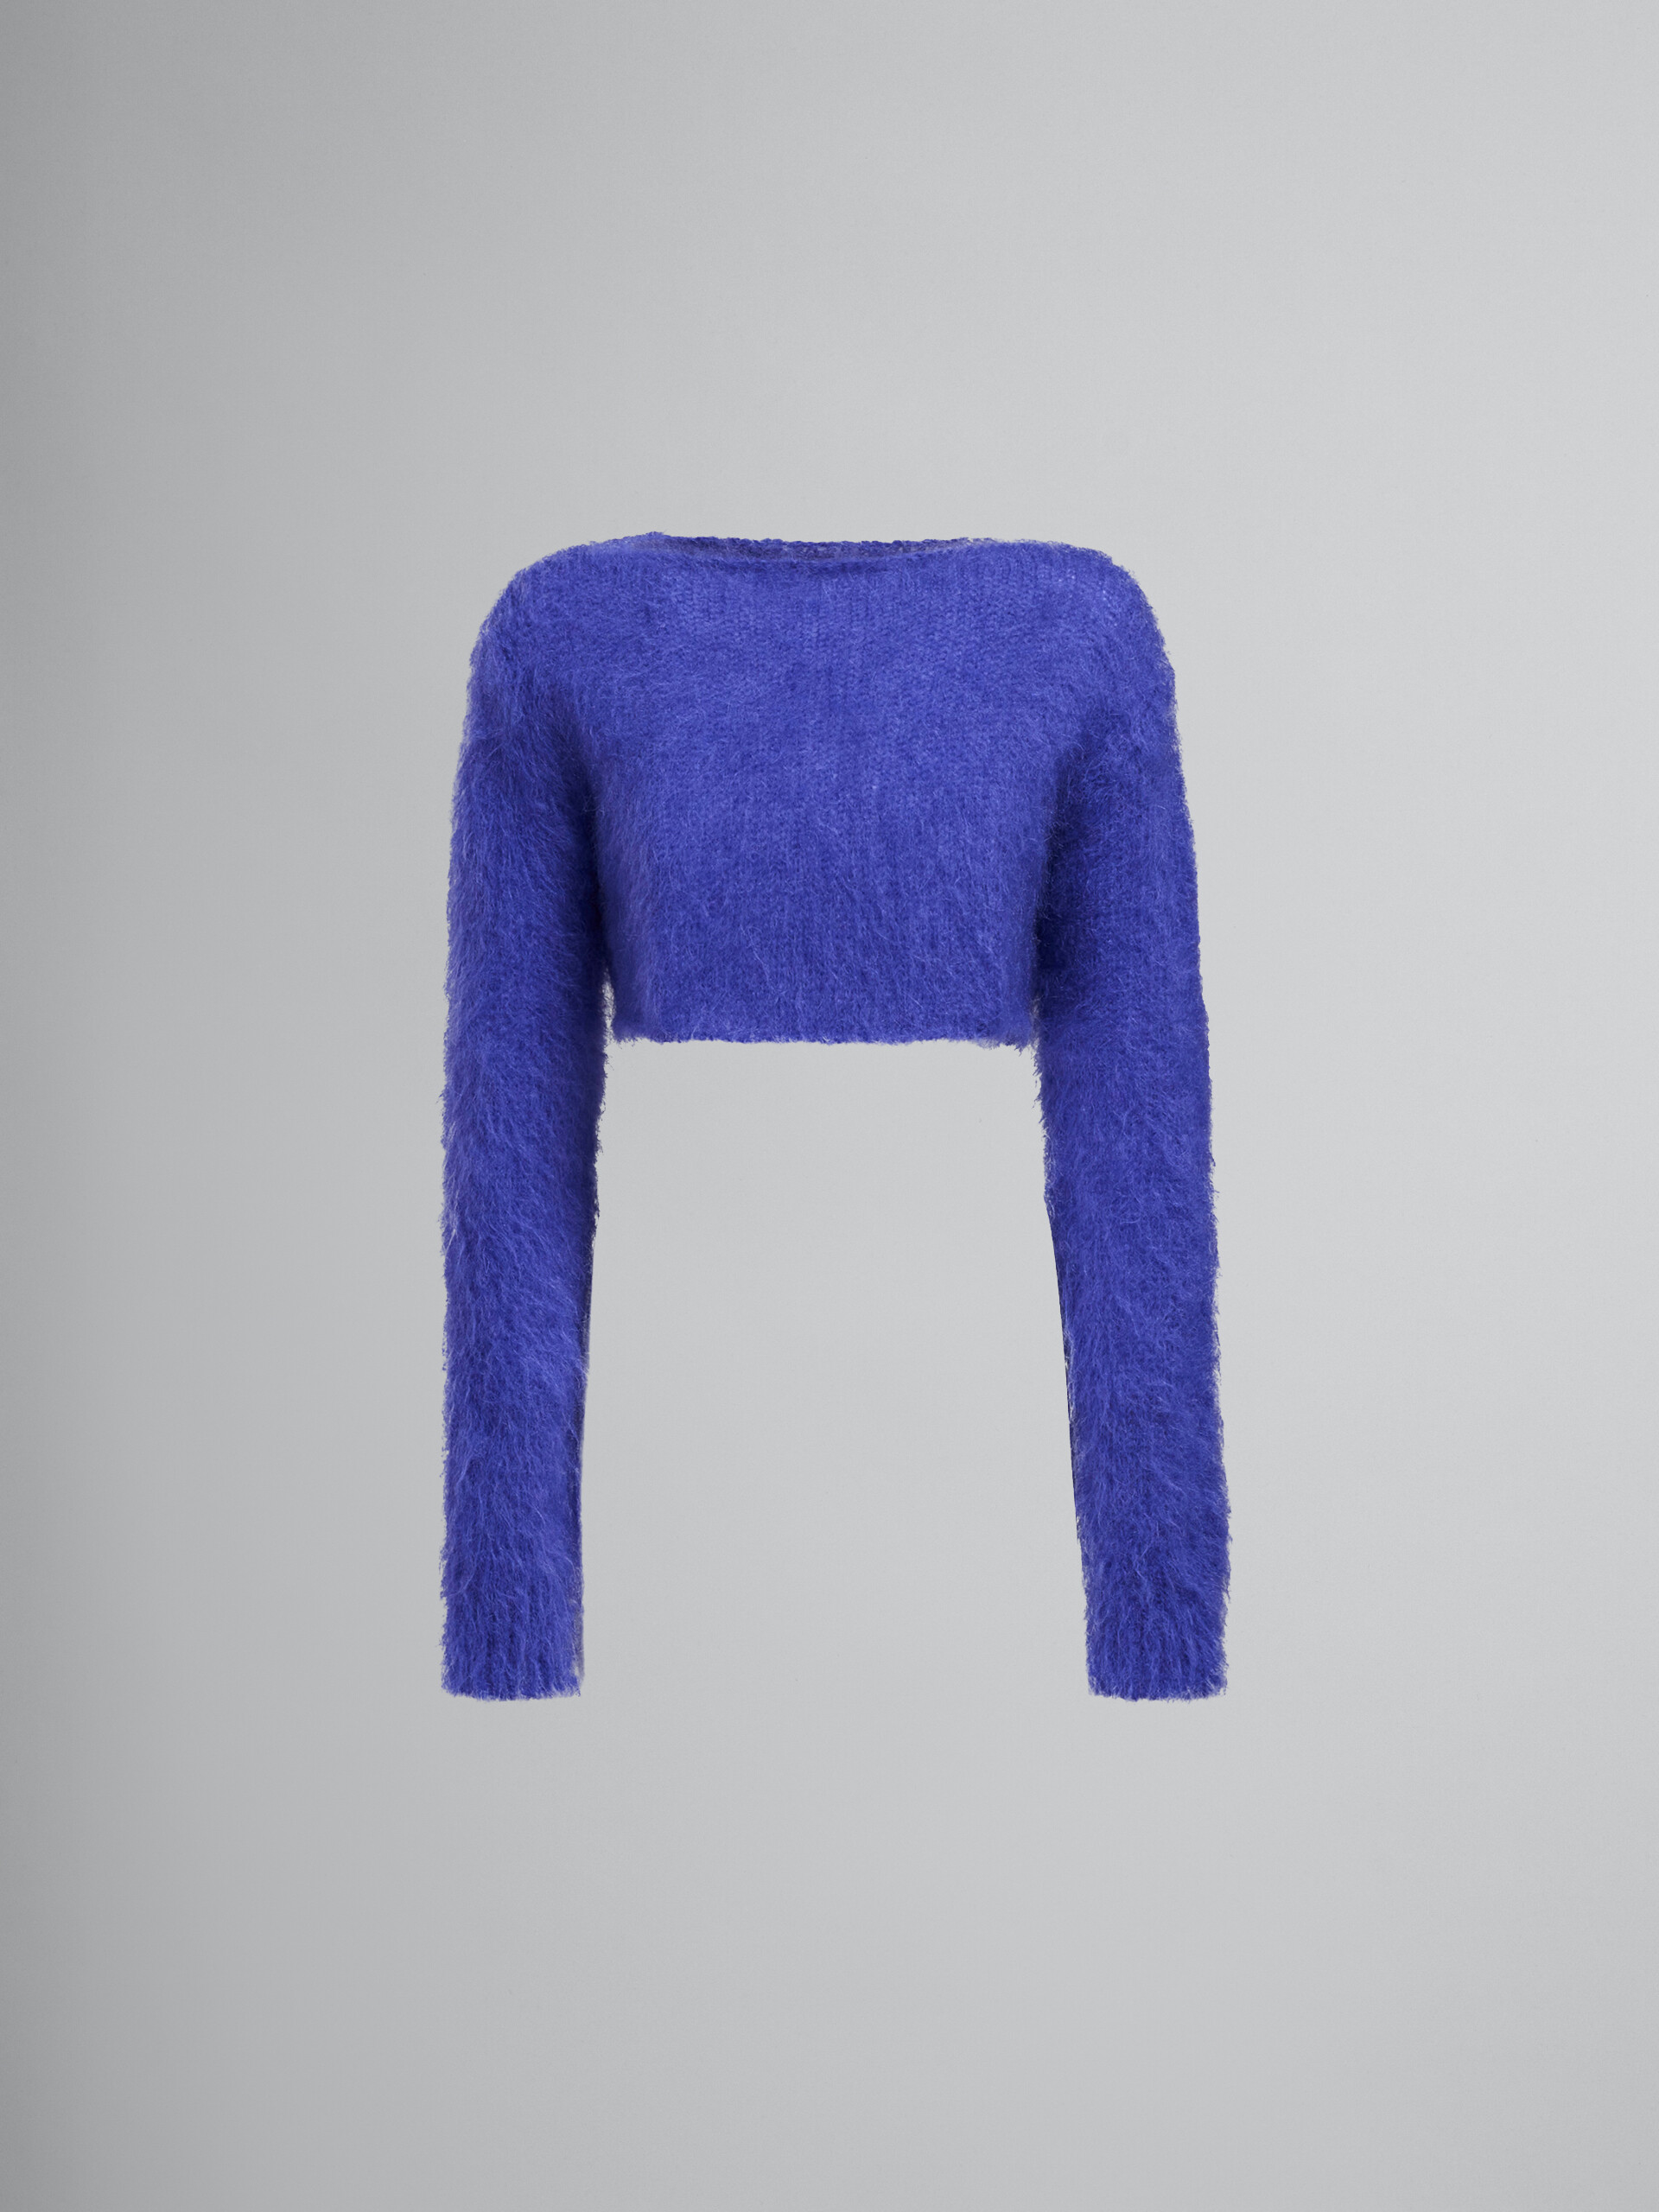 Mohair and wool crewneck cropped sweater - Pullovers - Image 1